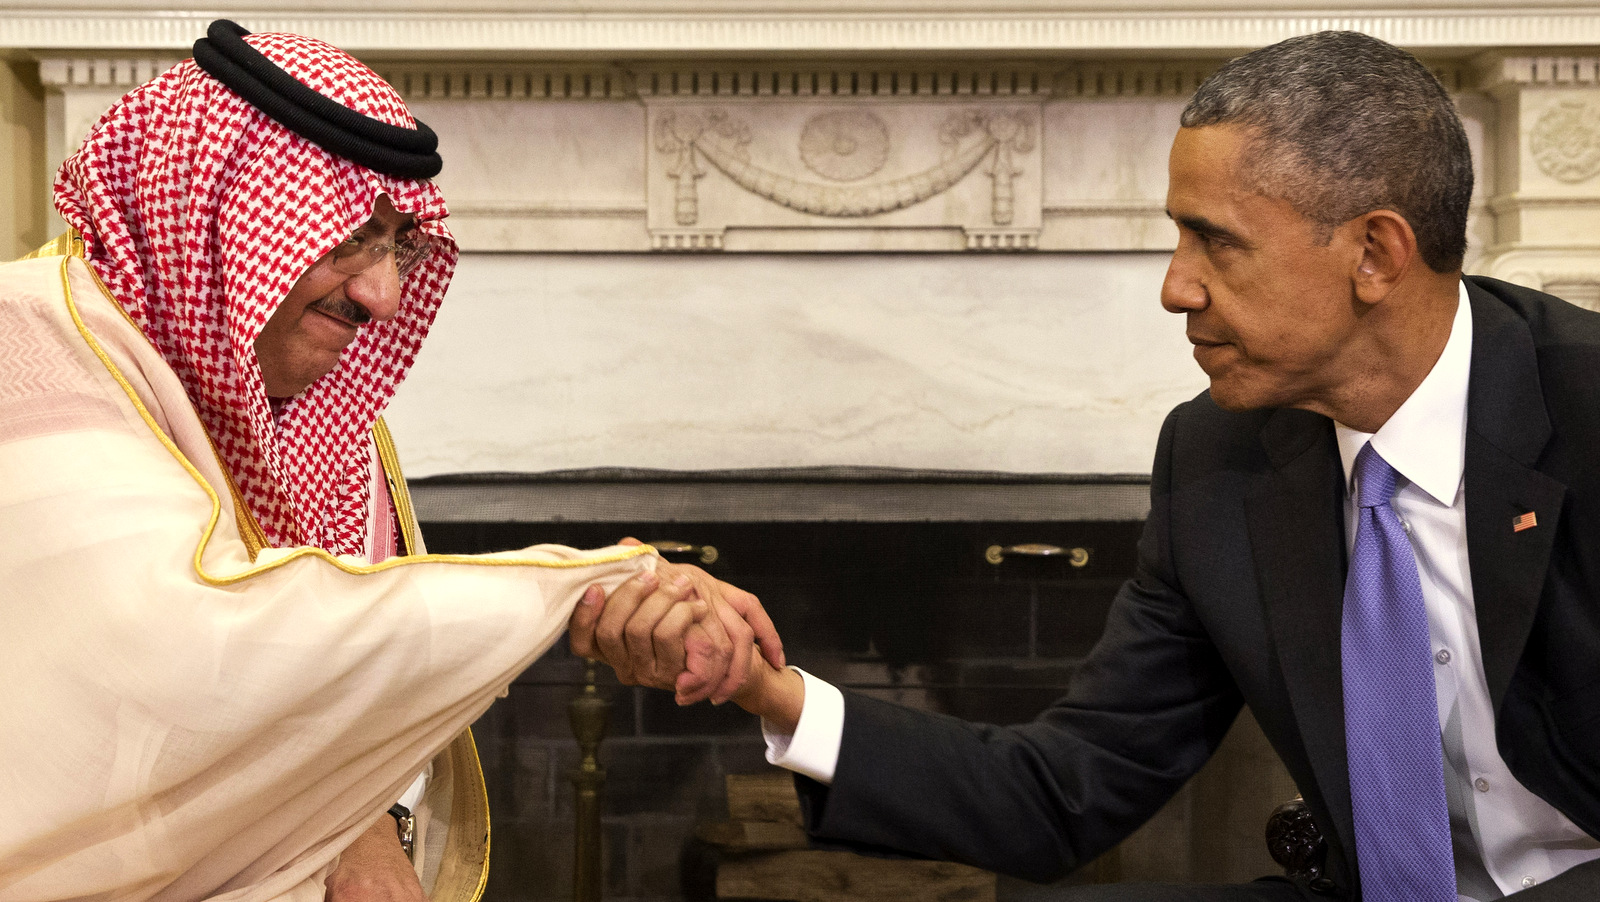 President Barack Obama shakes hands with Saudi Arabia's Crown Prince Mohammed bin Nayef during their meeting in the Oval Office of the White House in Washington, Wednesday, May 13, 2015. (AP Photo/Jacquelyn Martin)